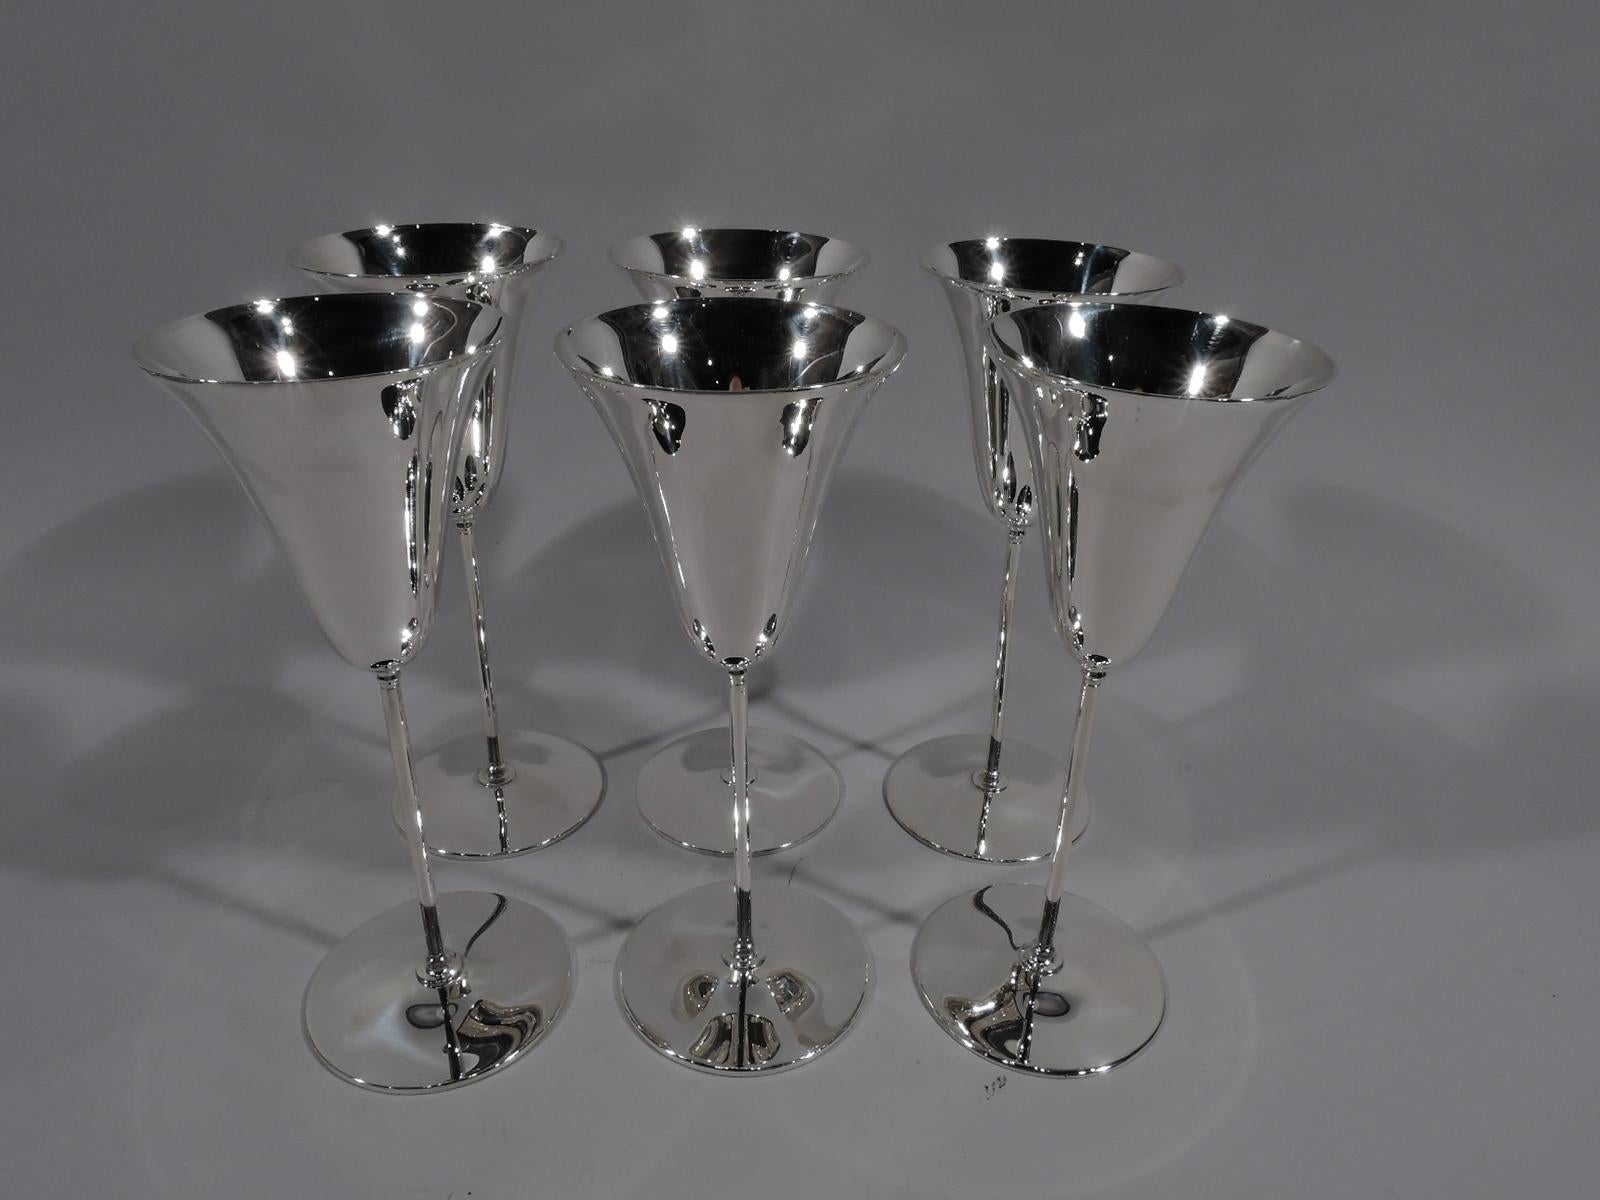 Set of 6 Art Deco sterling silver flutes. Made by Tiffany & Co. in New York, circa 1924. Each: Conical “tulip” bowl on thin cylindrical shaft mounted to flat circular foot. For chic sipping. Fully marked including pattern no. 20468 (first produced